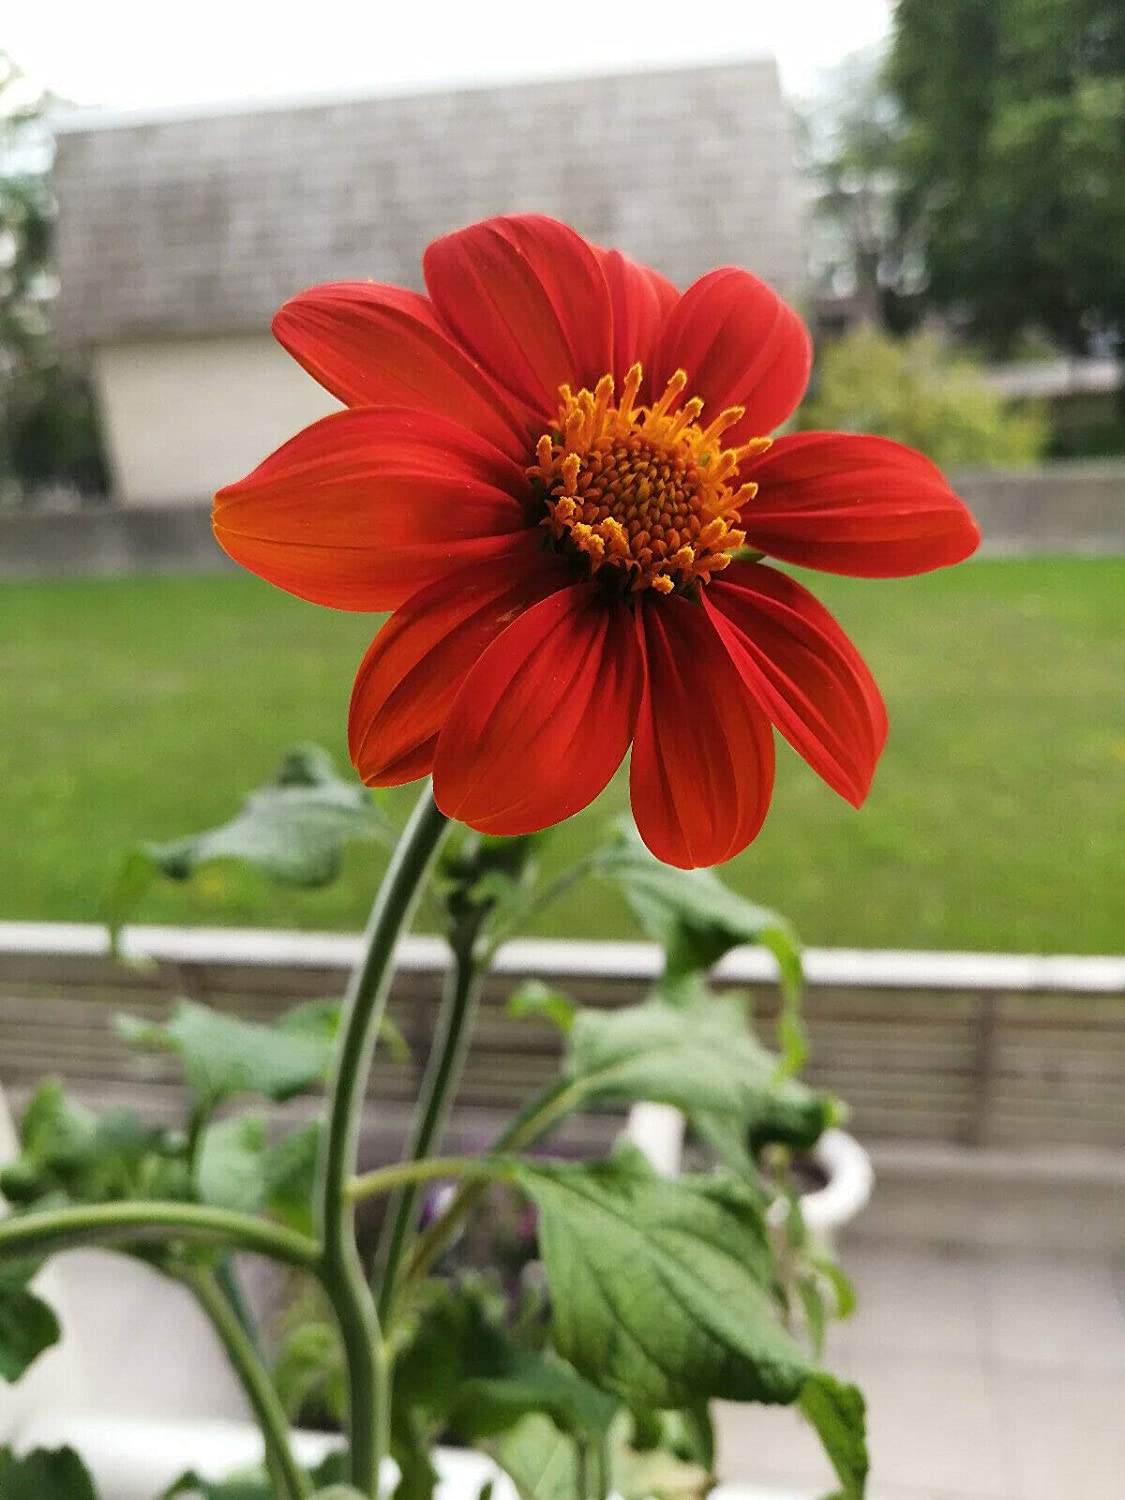 Torch Tithonia 50 Flower Seeds - Tithonia rotundifolia, Mexican Sunflower for Bees, Butterflies and Hummingbirds, Flower Bed, Border & Container